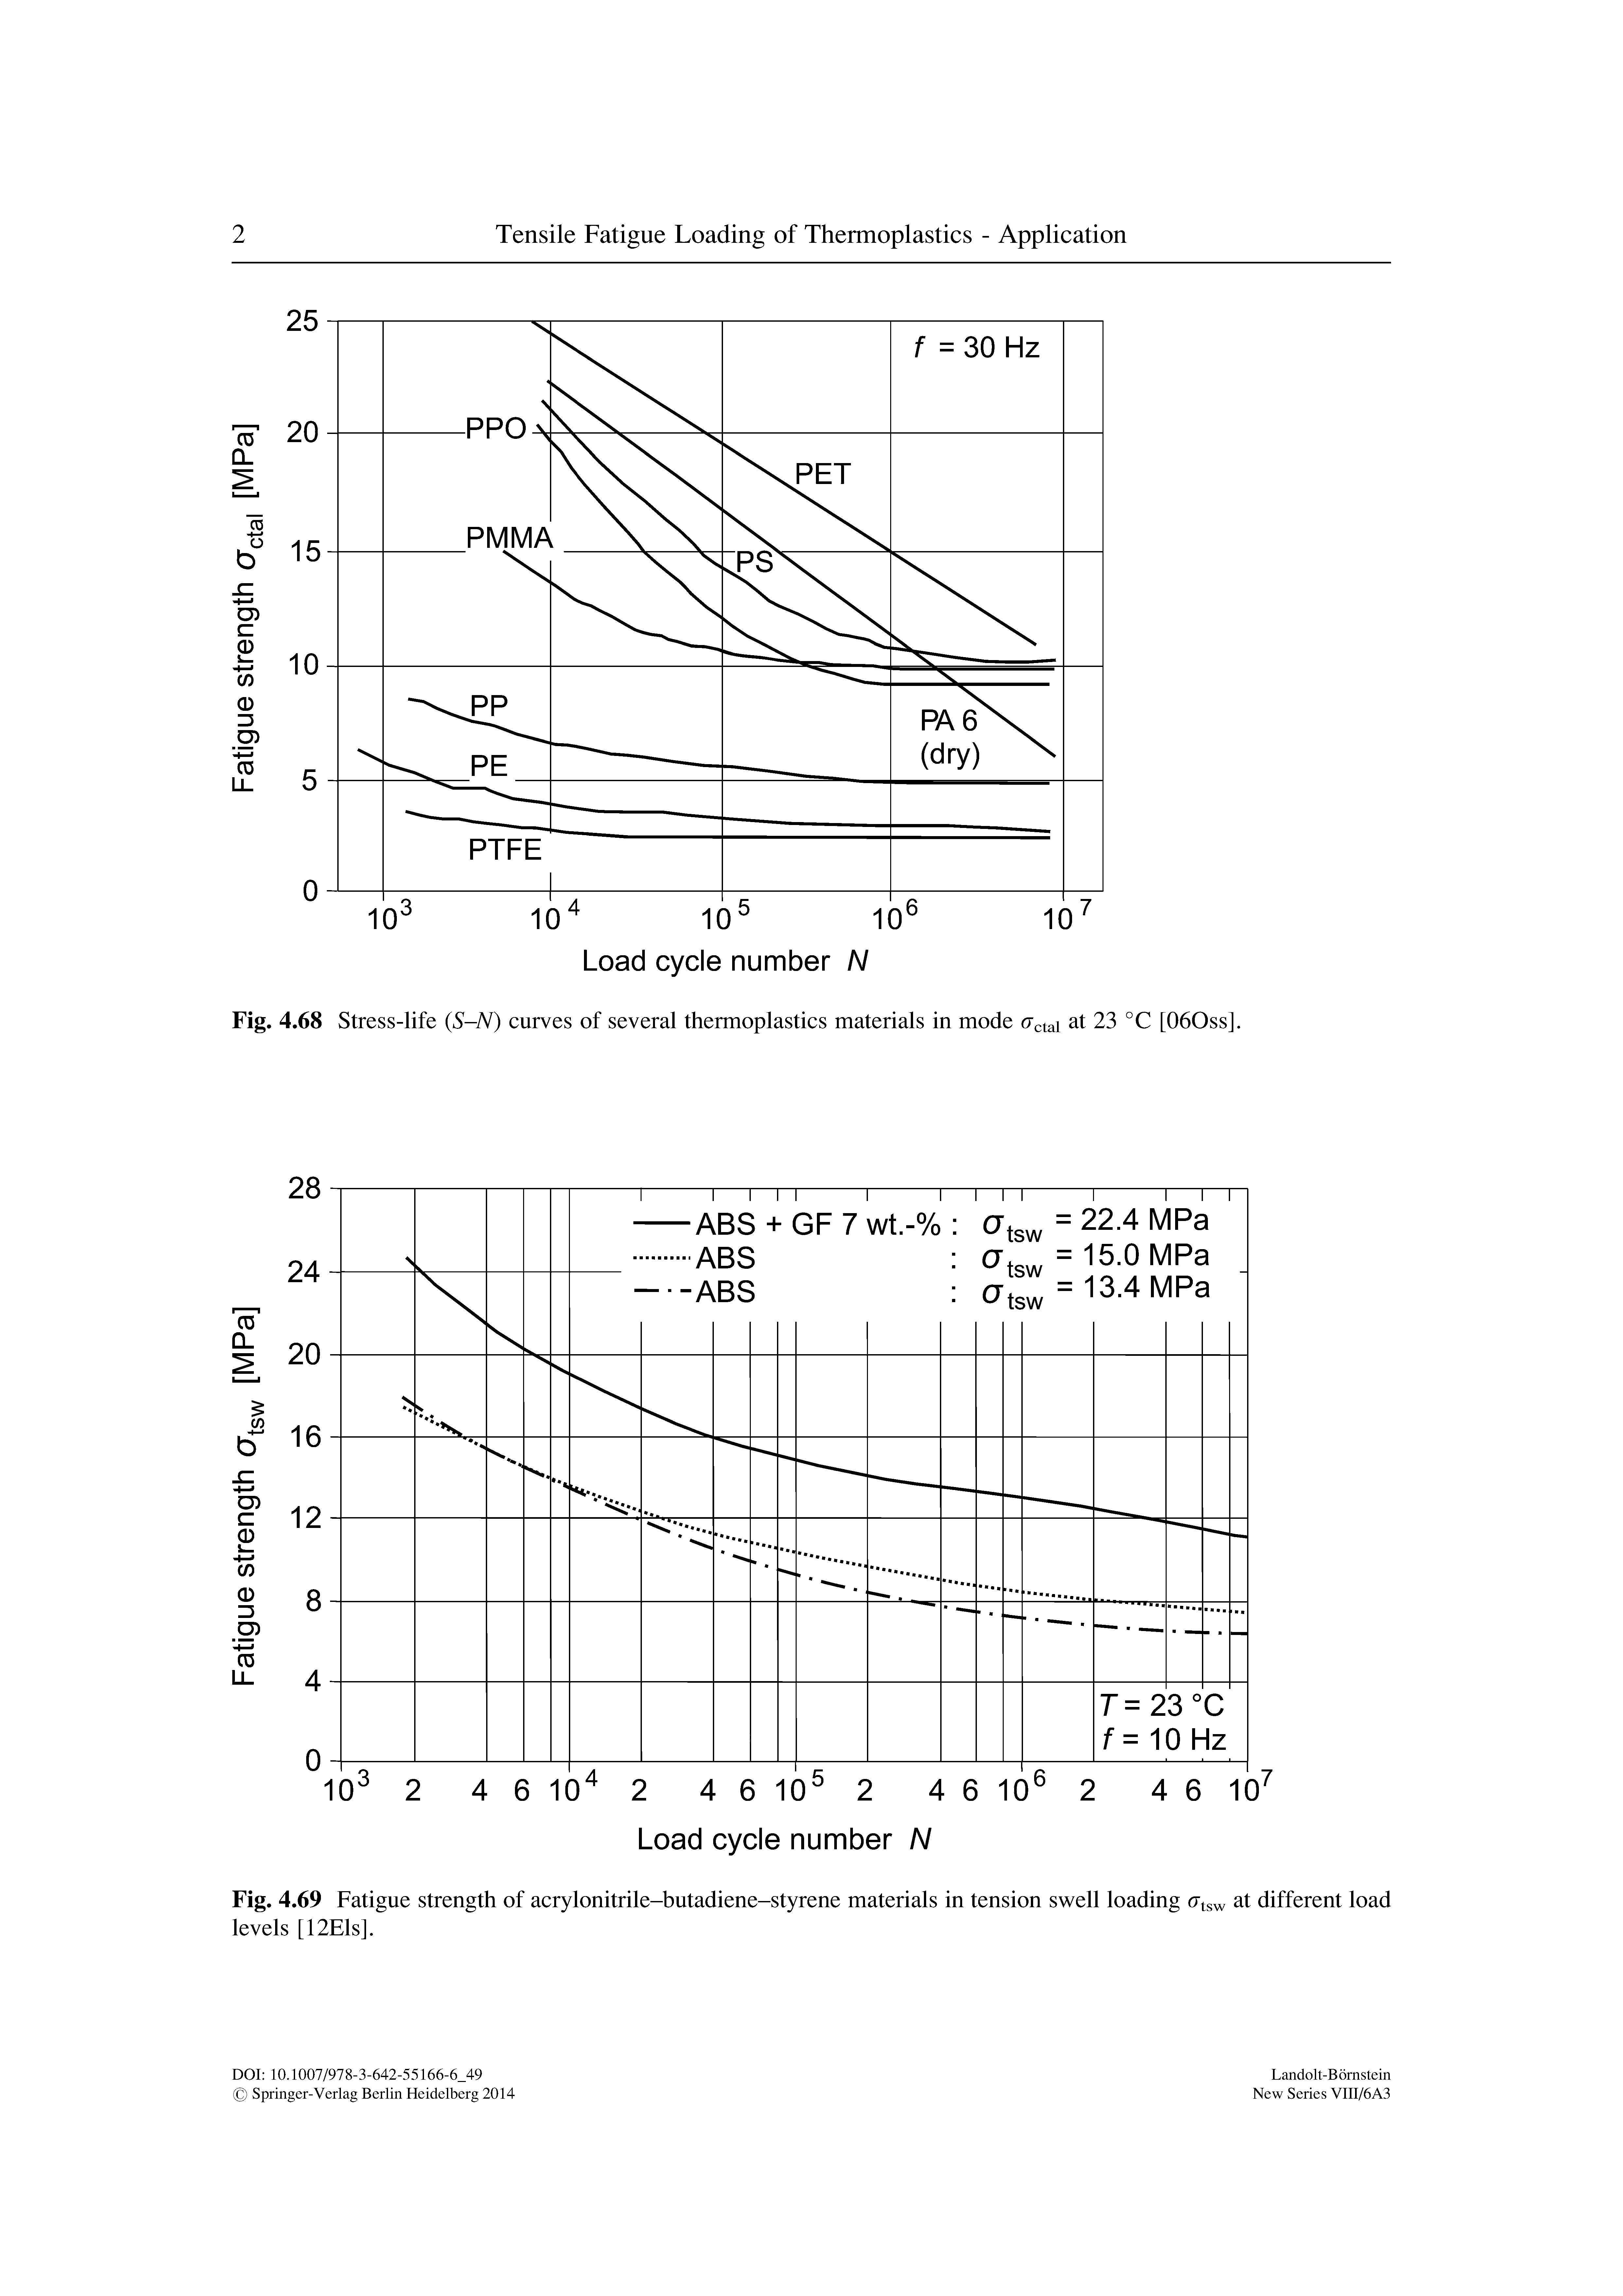 Fig. 4.69 Fatigue strength of acrylonitrile-butadiene-styrene materials in tension swell loading Ctsw at different load levels [12Els].